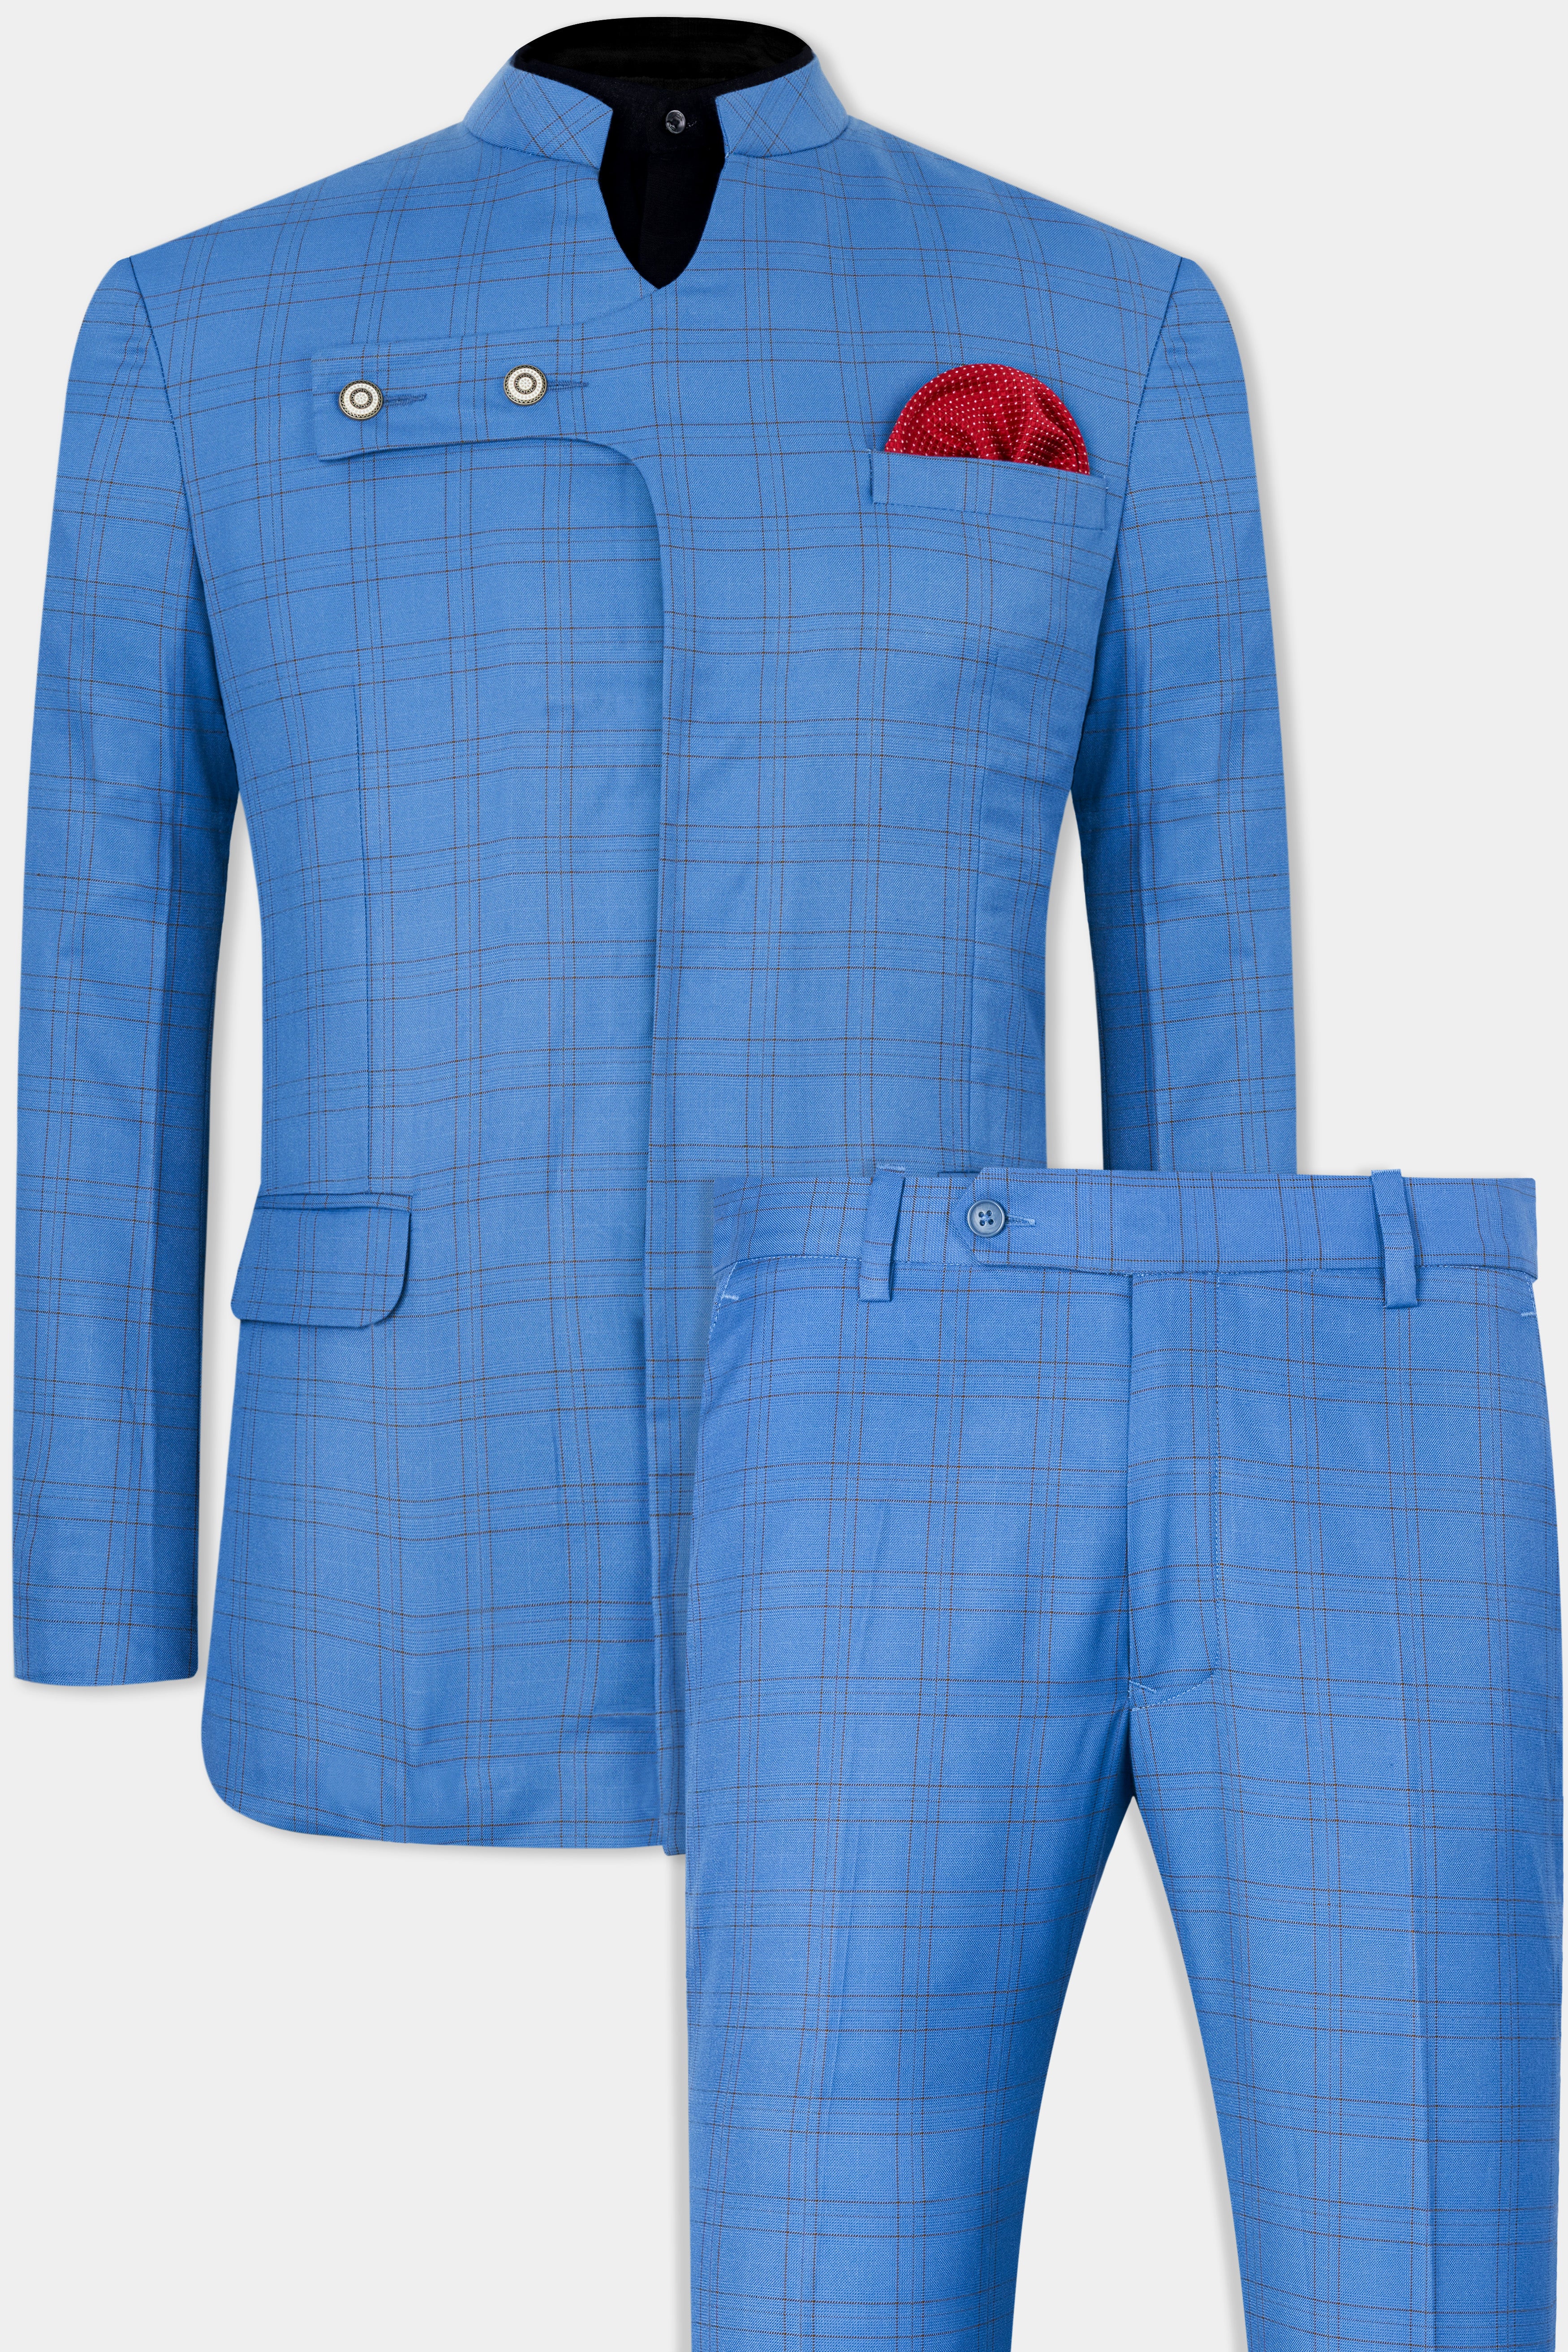 Tufts Blue and Taupe Brown Plaid Wool Rich Bandhgala Designer Suit ST2876-D434-36,ST2876-D434-38,ST2876-D434-40,ST2876-D434-42,ST2876-D434-44,ST2876-D434-46,ST2876-D434-48,ST2876-D434-50,ST2876-D434-52,ST2876-D434-54,ST2876-D434-56,ST2876-D434-58,ST2876-D434-60